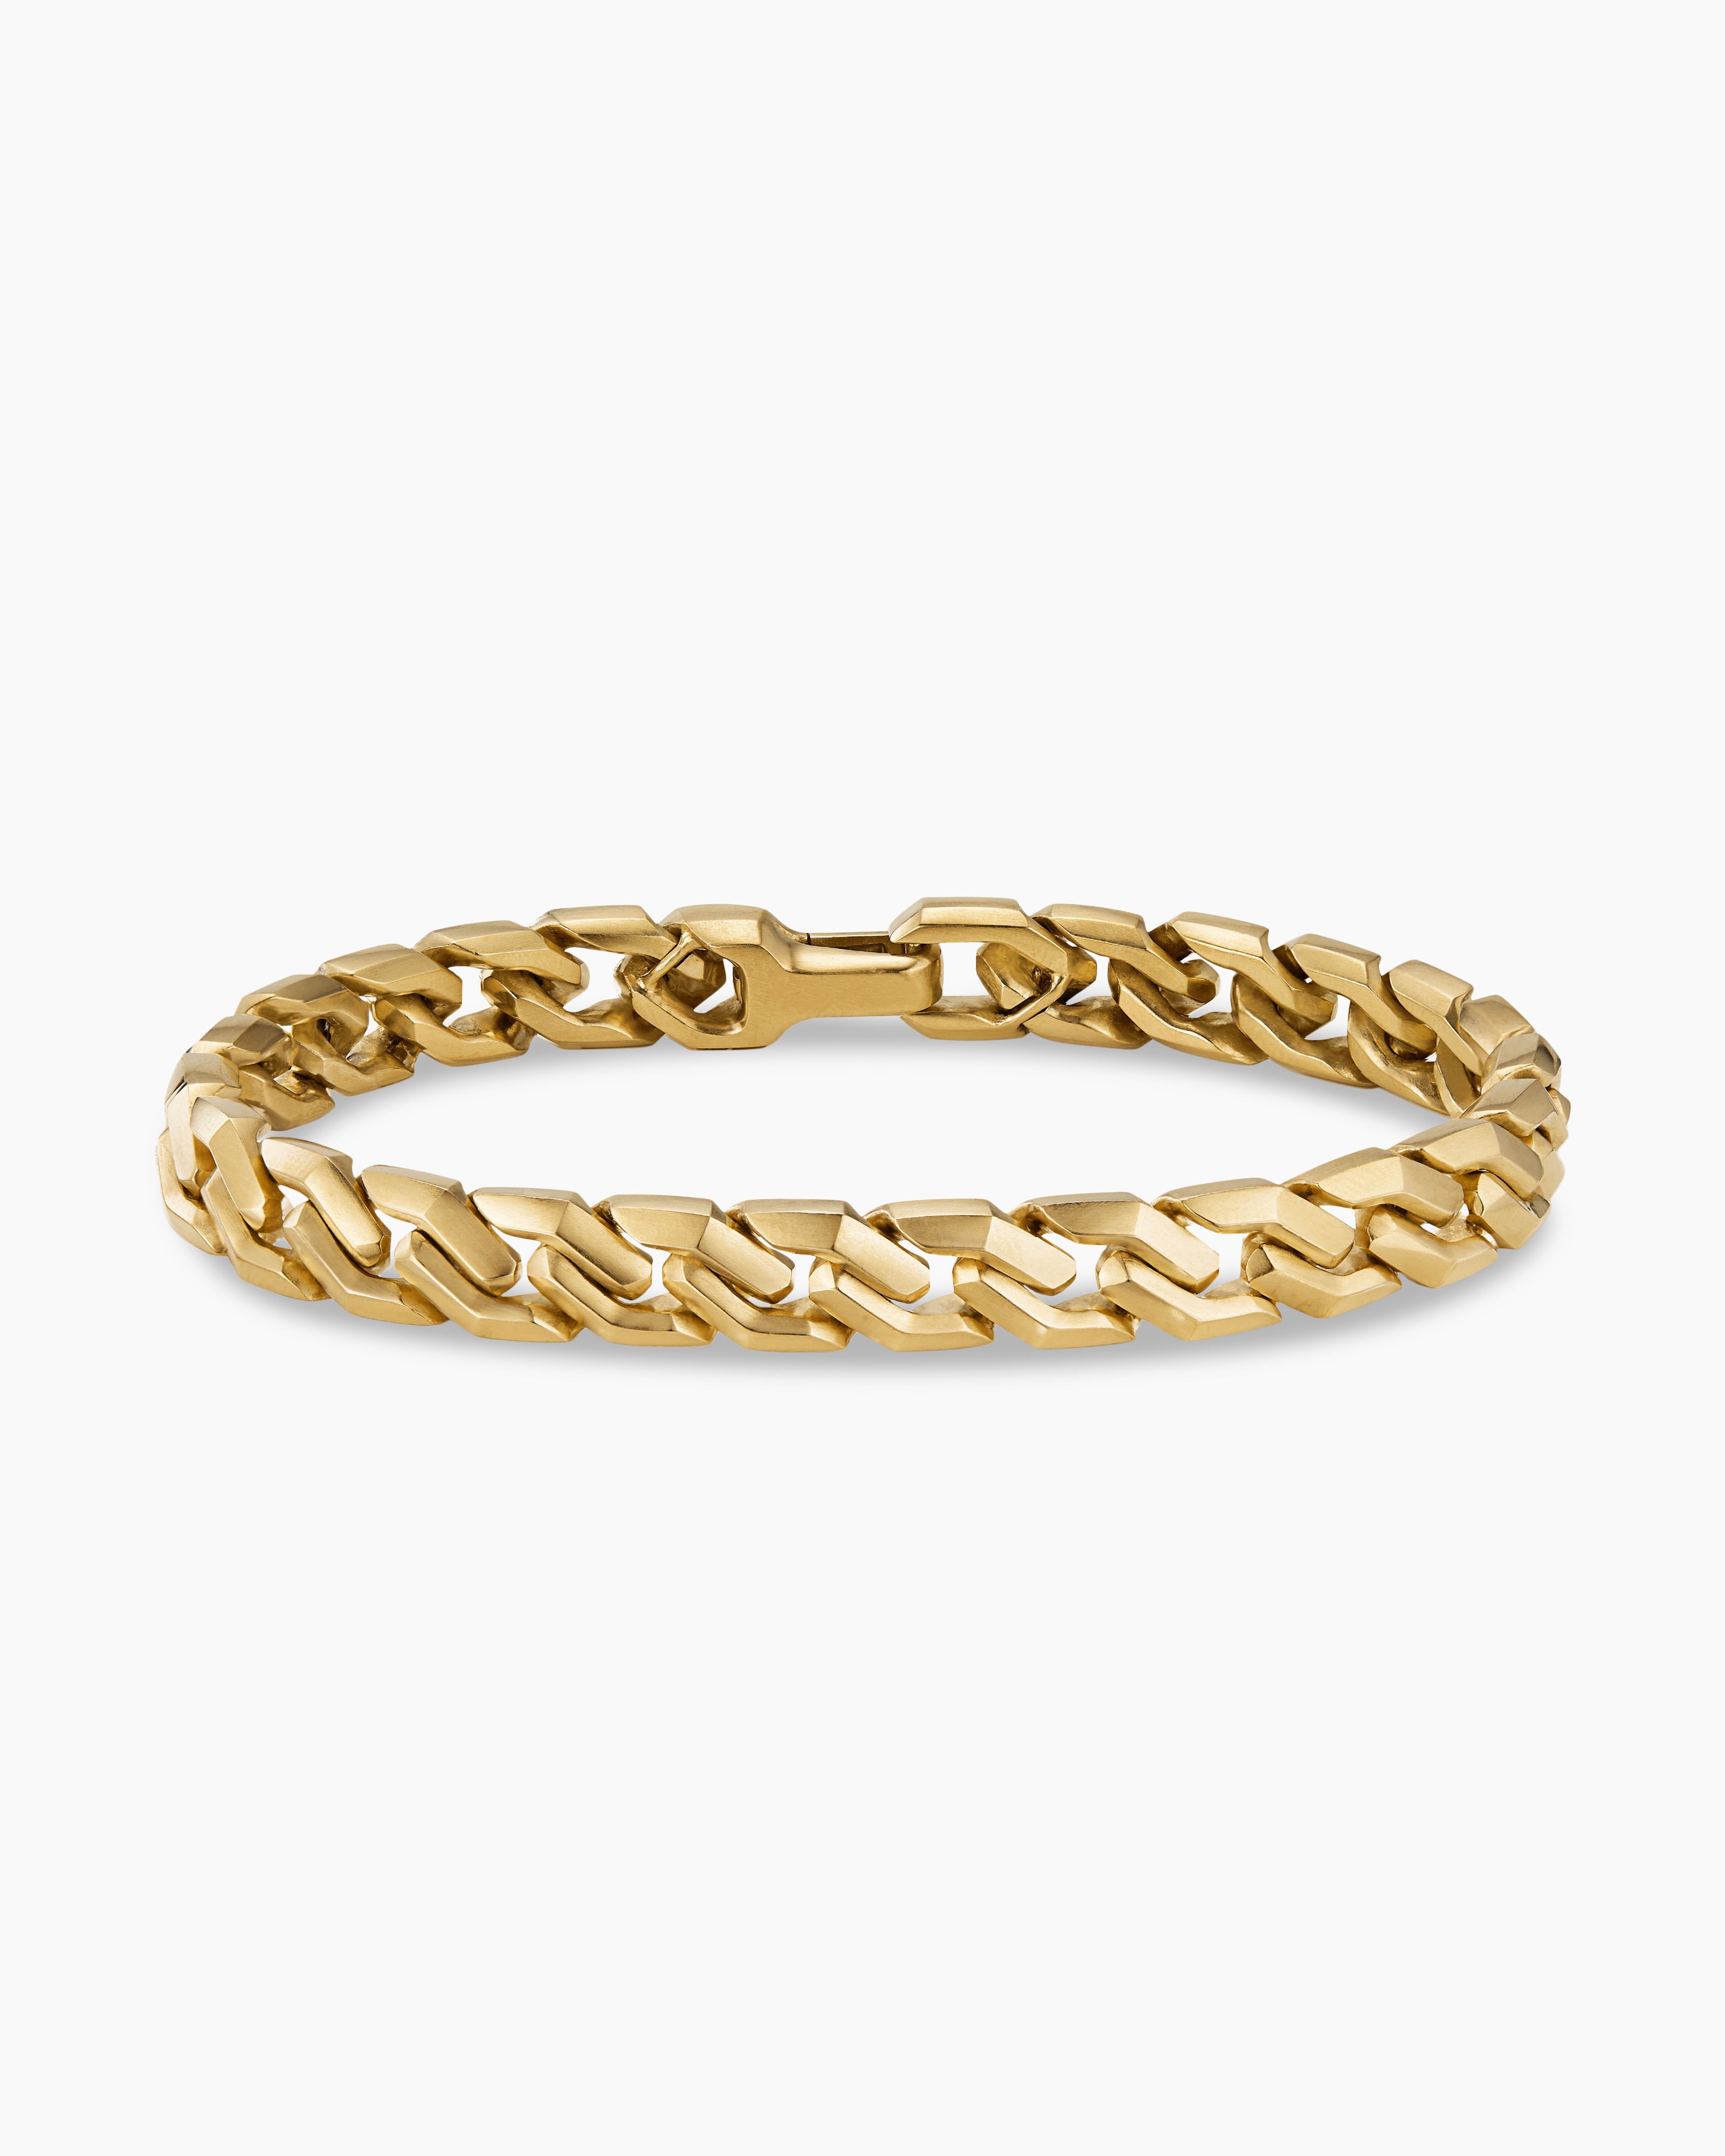 Elegant 24K Gold Plated Mens Bracelet, 15mm Width, 8 Inch Length, Textured  Design Fashion Jewelry From Charm_girls, $10.75 | DHgate.Com